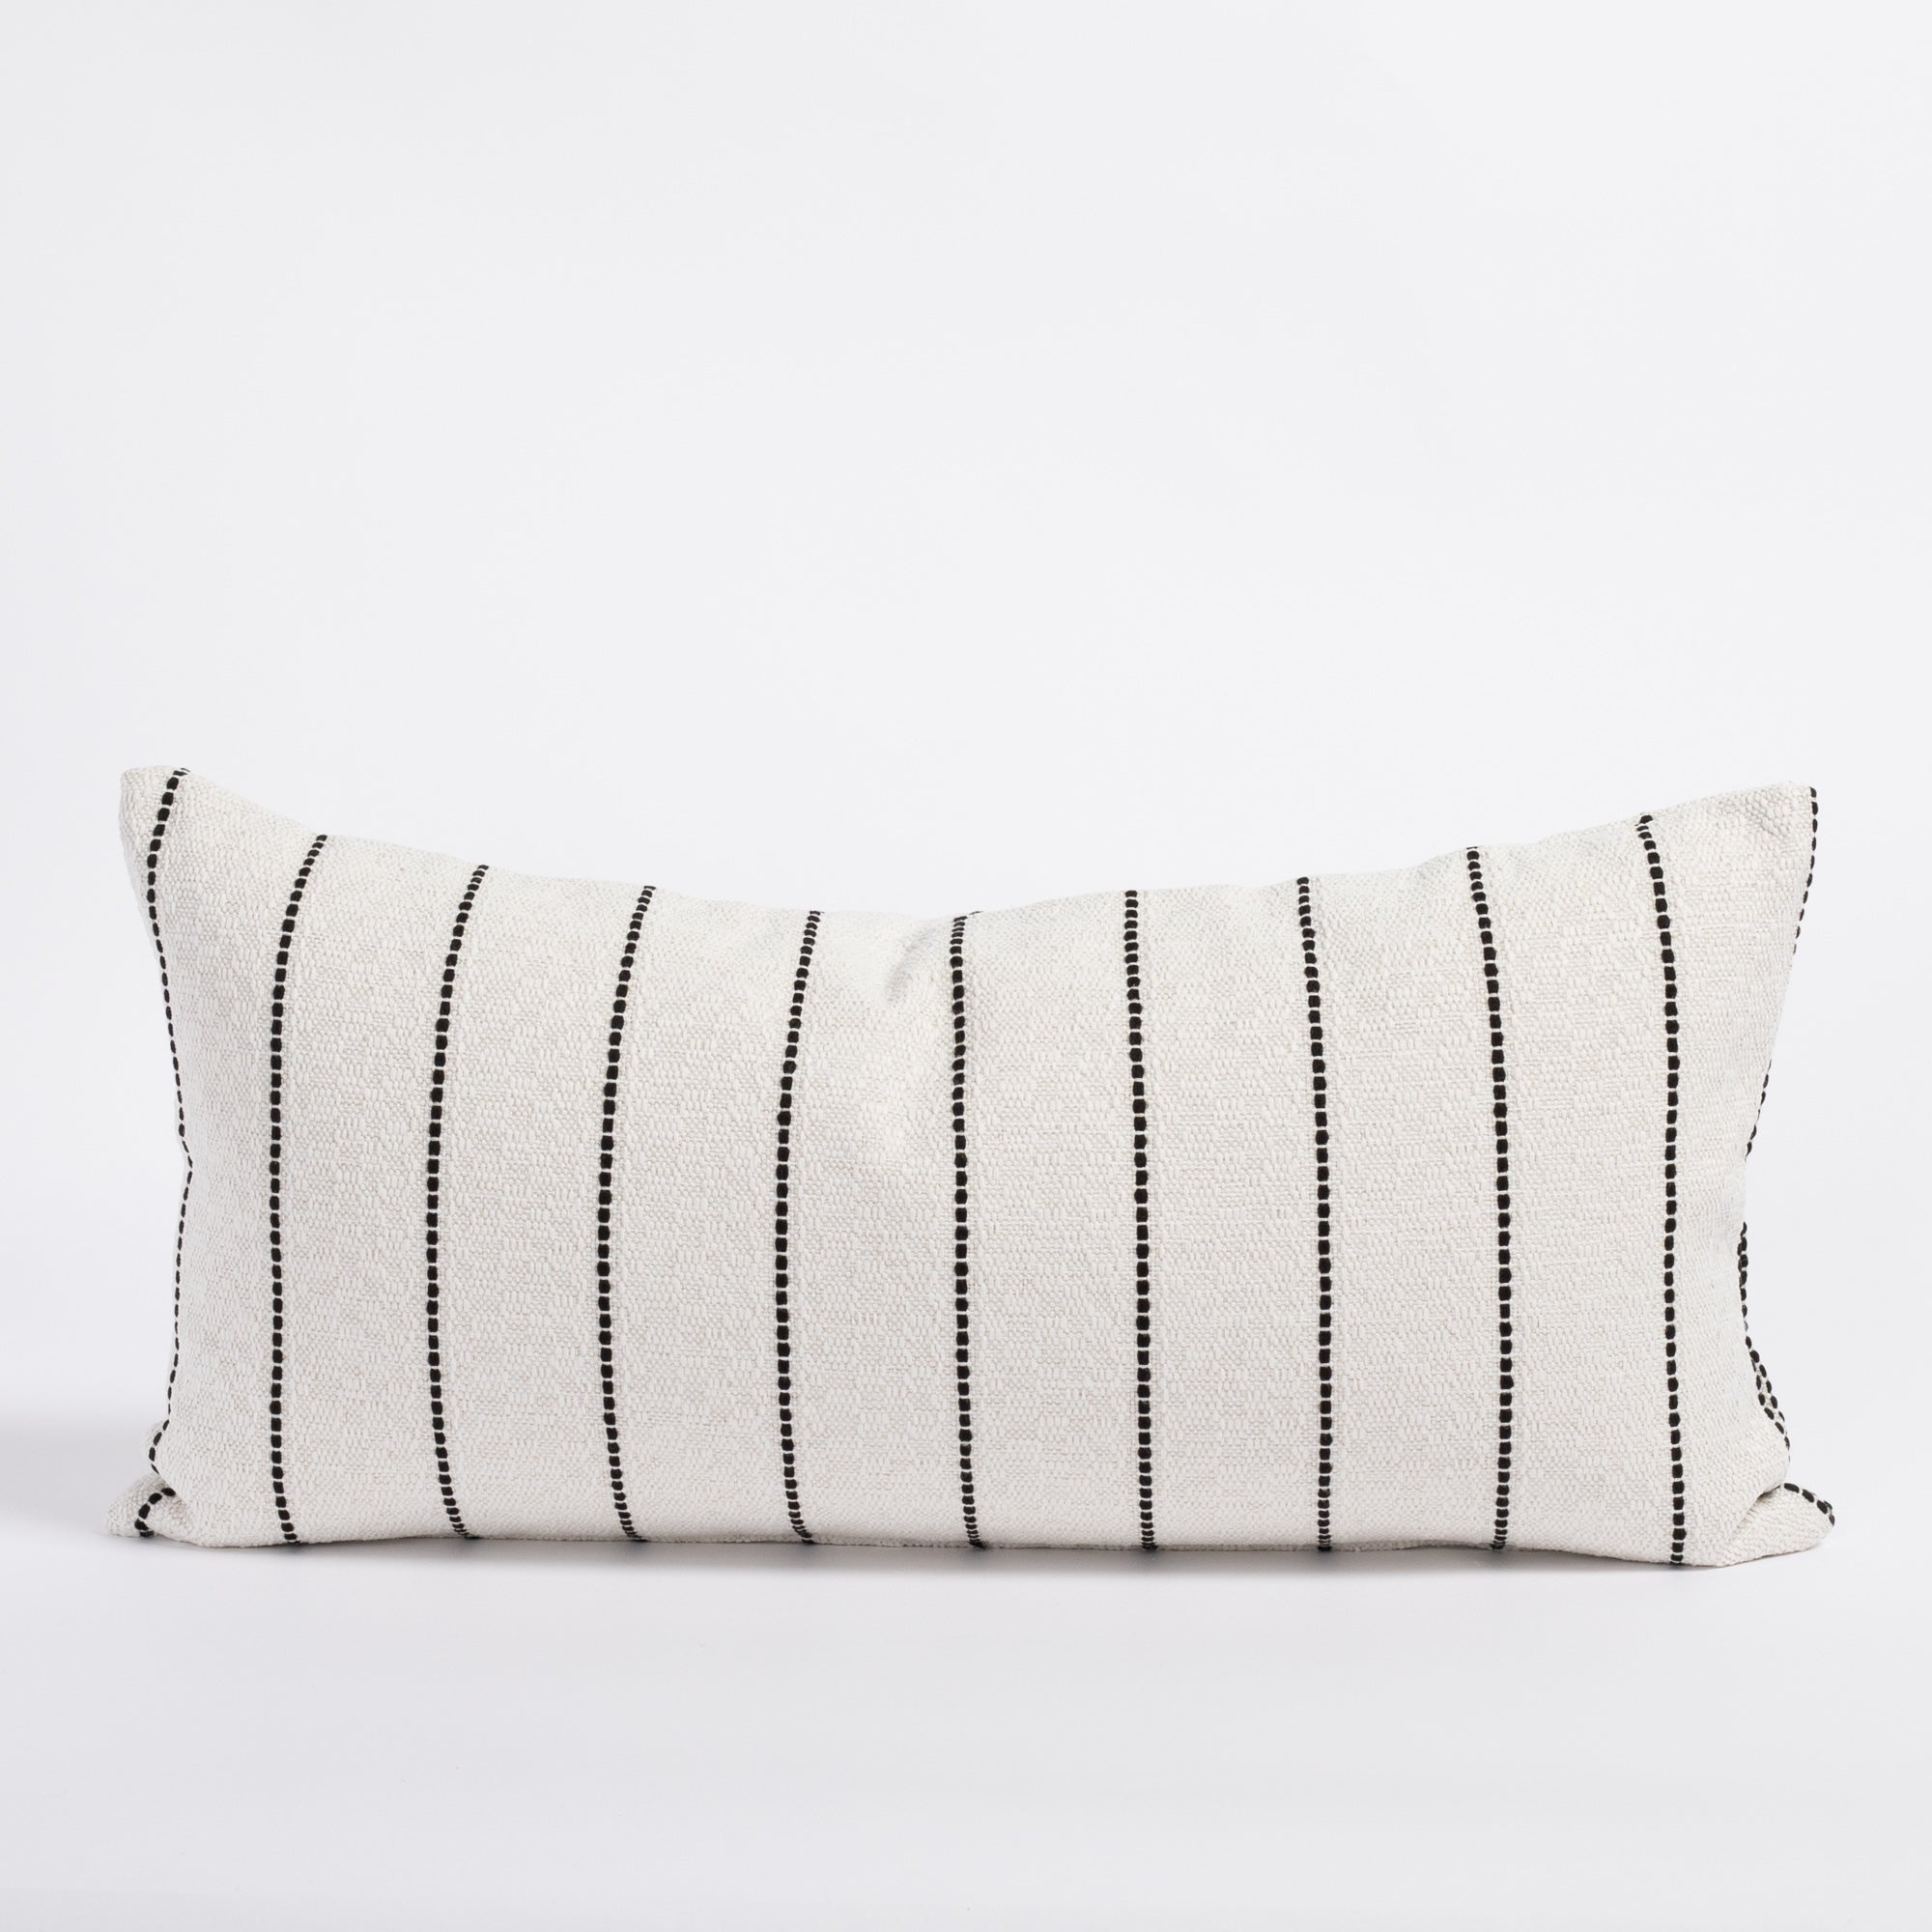 Toulouse Onyx 12x24 Lumbar Pillow, a white with black vertical stripe lumbar pillow from Tonic Living